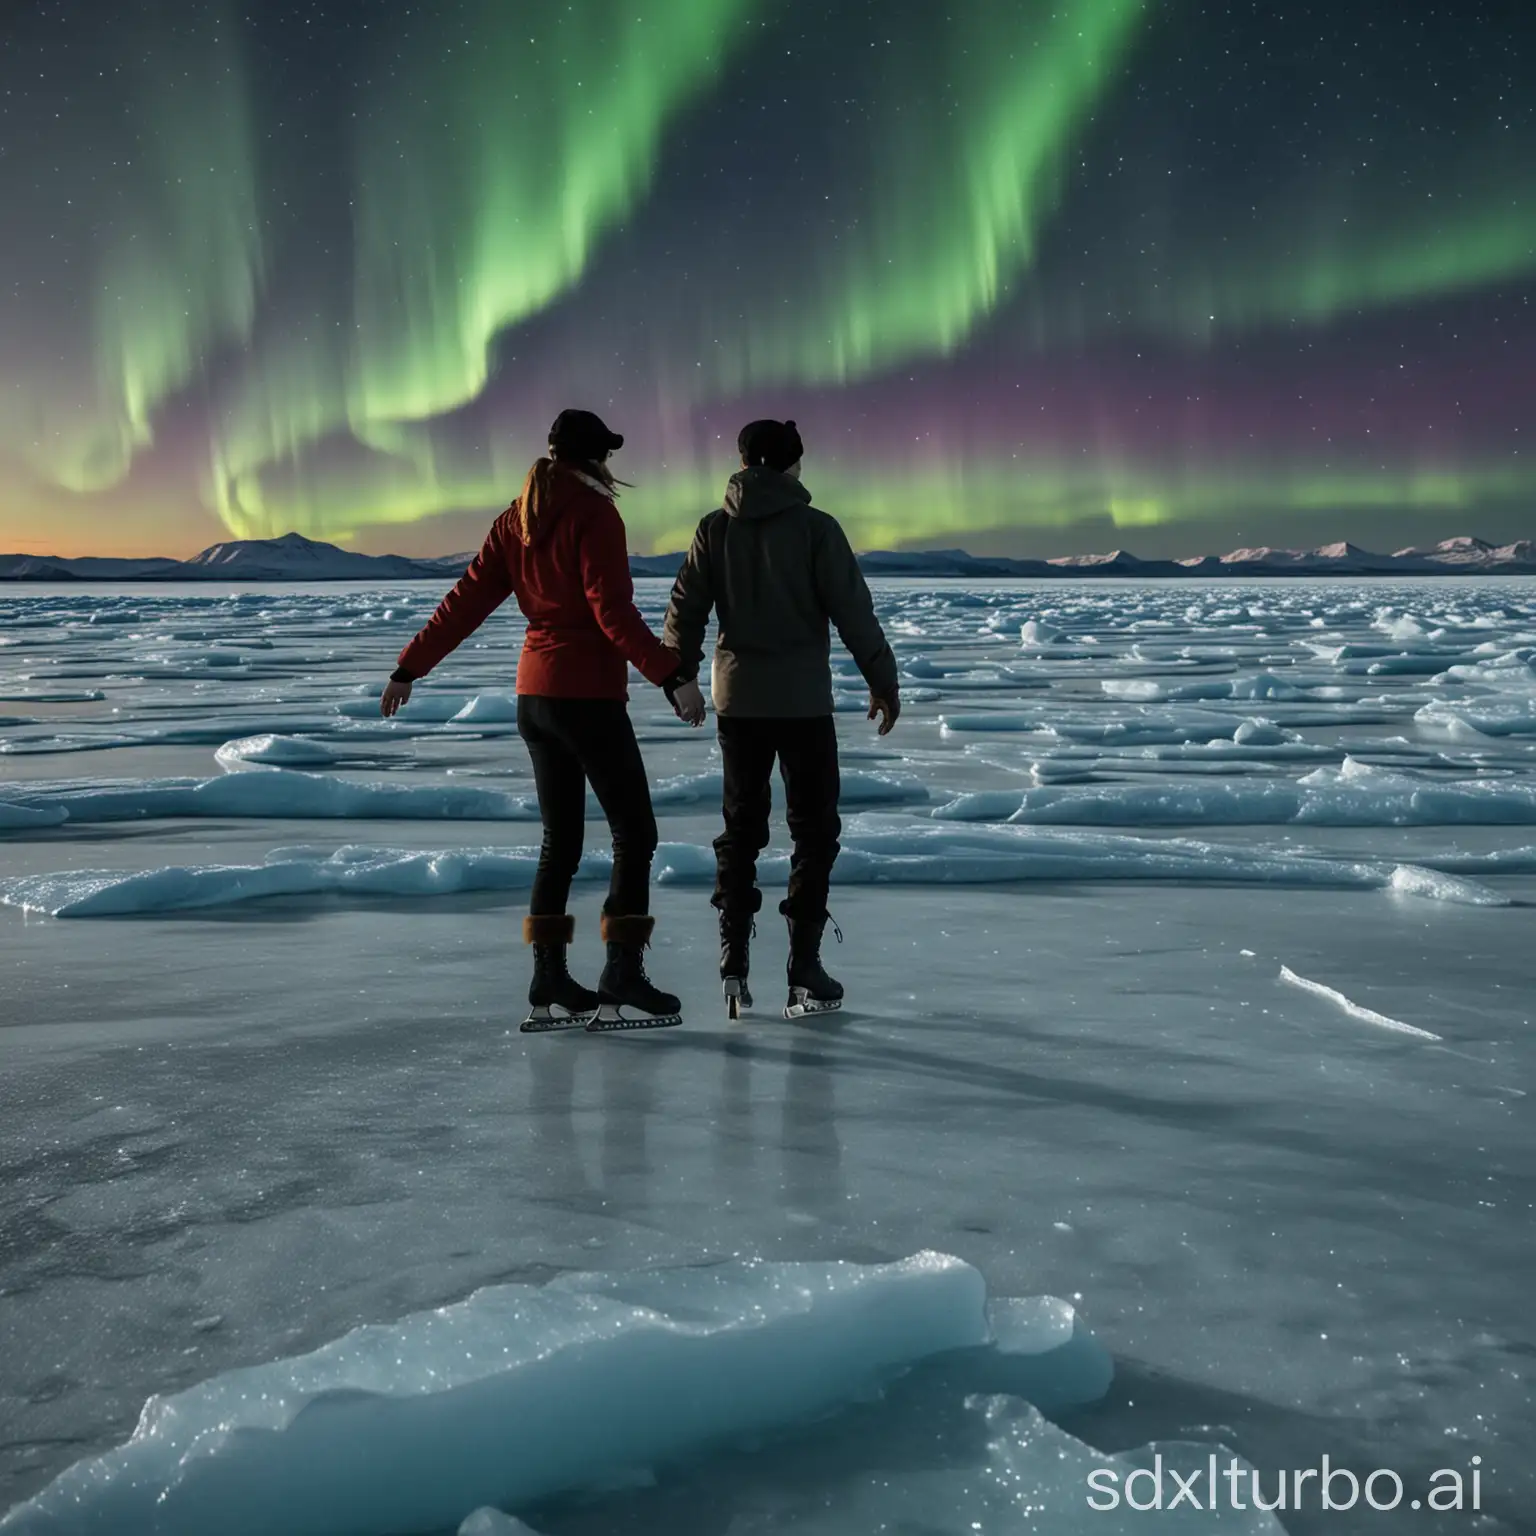 close view of a couple dancing, skating on cracking ice, North Pole, aurora borealis on the background